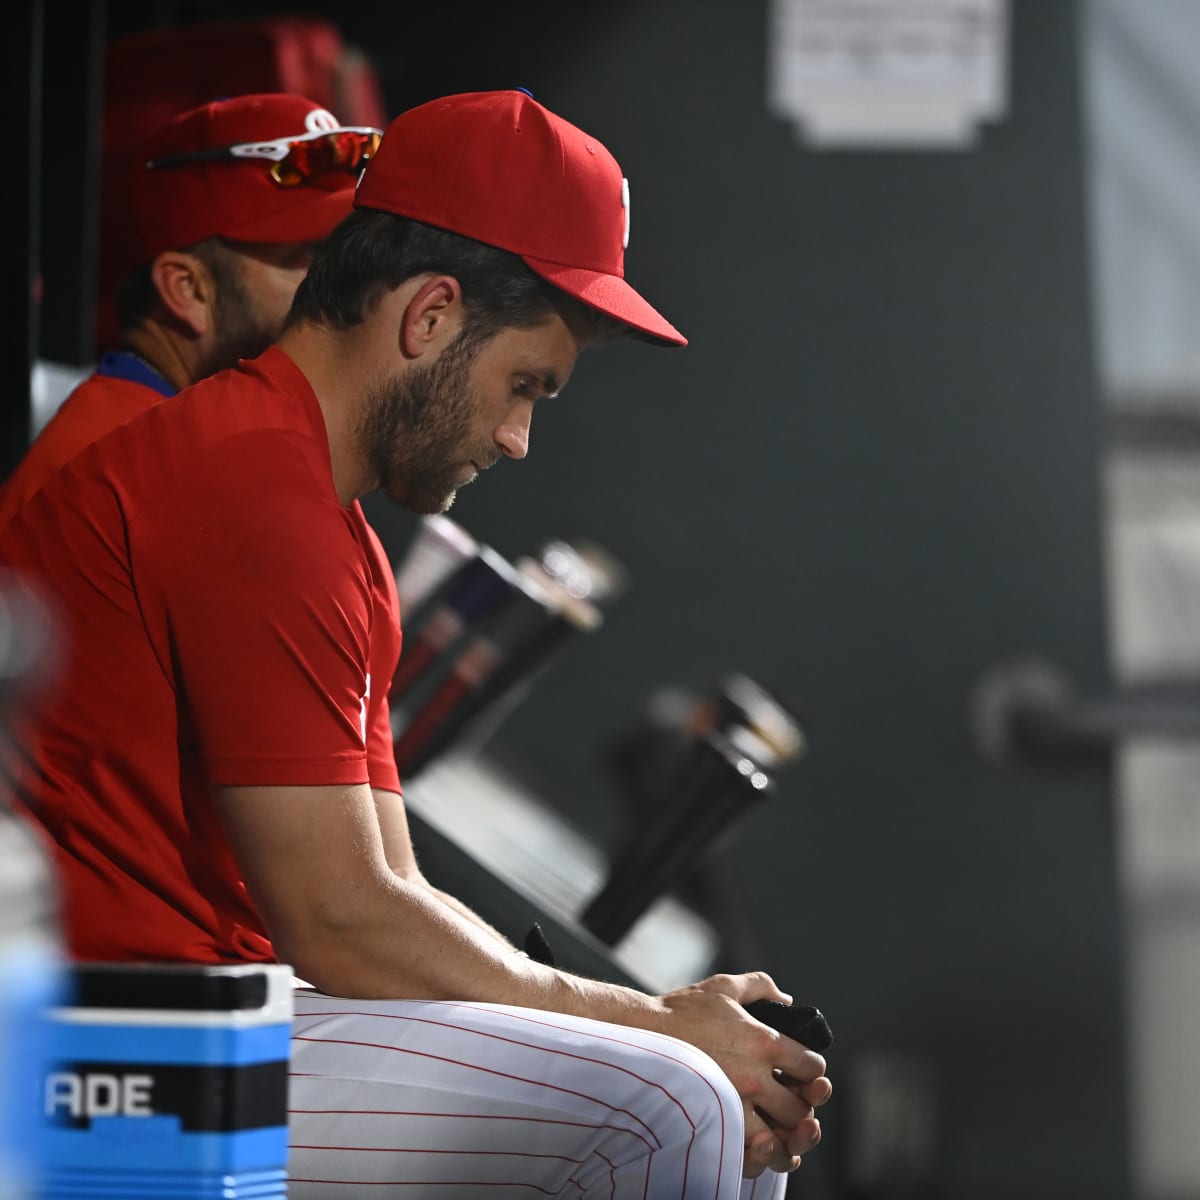 Phillies' slugger still stepping up rehab after elbow surgery